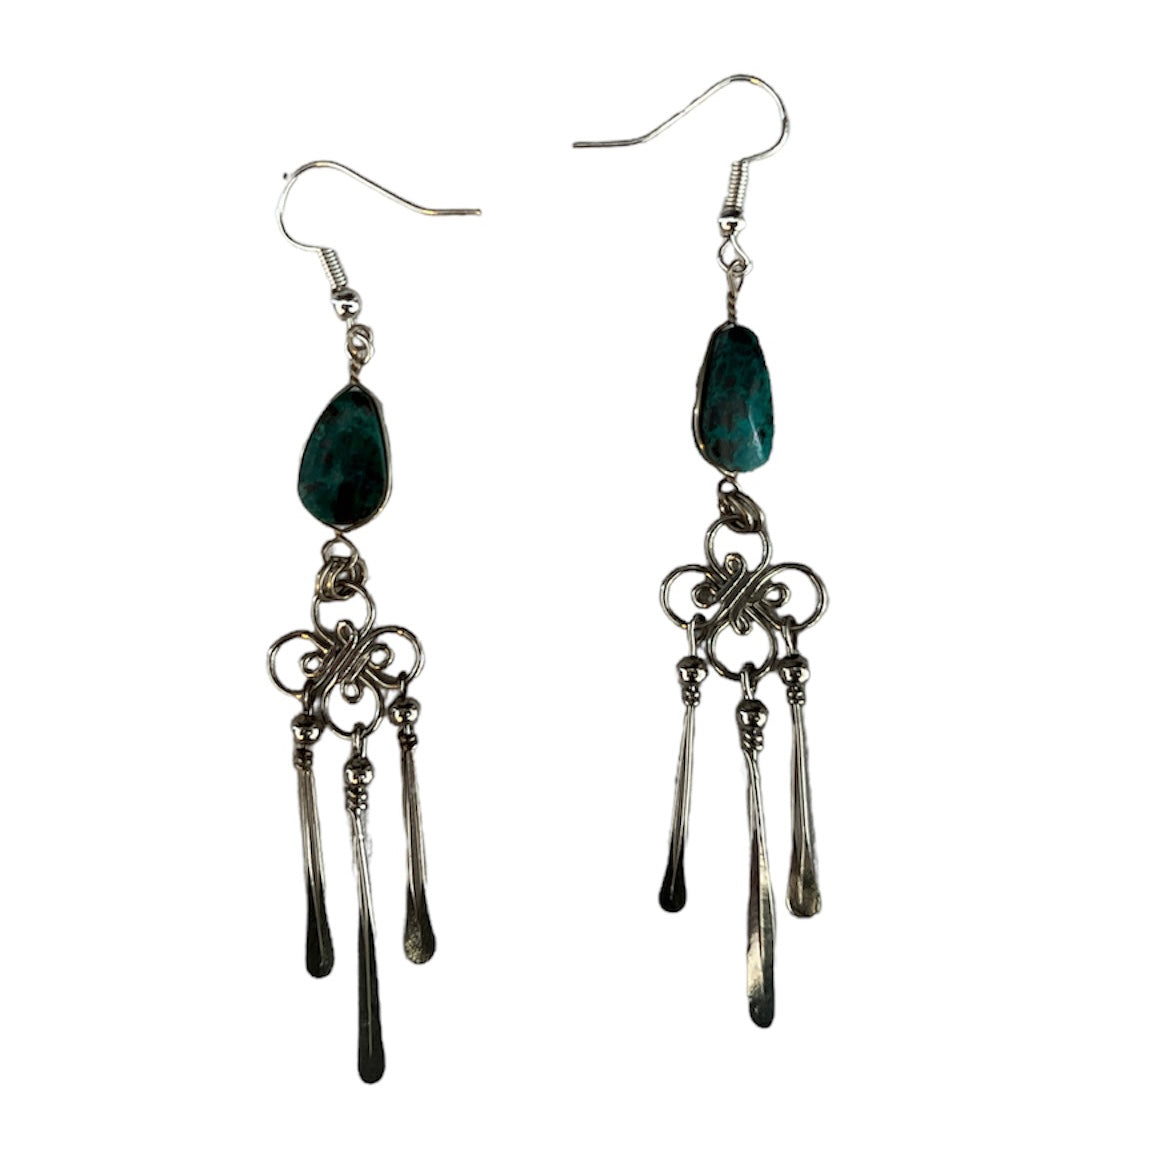 Dangly Silver and Peruvian Turquoise Earrings - Made by Peruvian Amazon Artisan